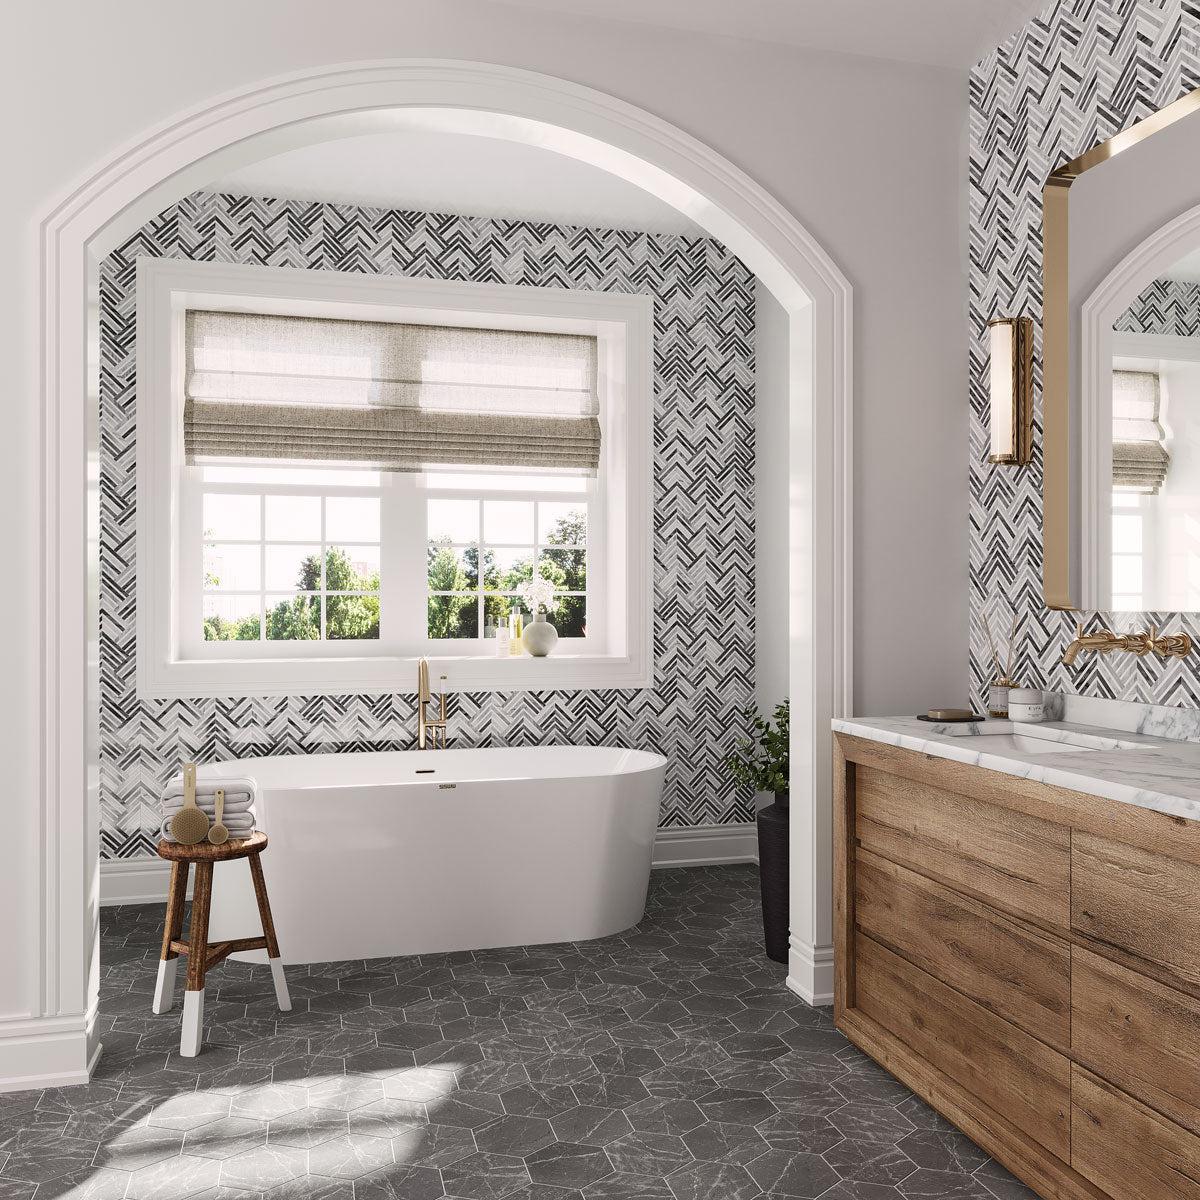 Gray and white bathroom with geometric marble tile walls